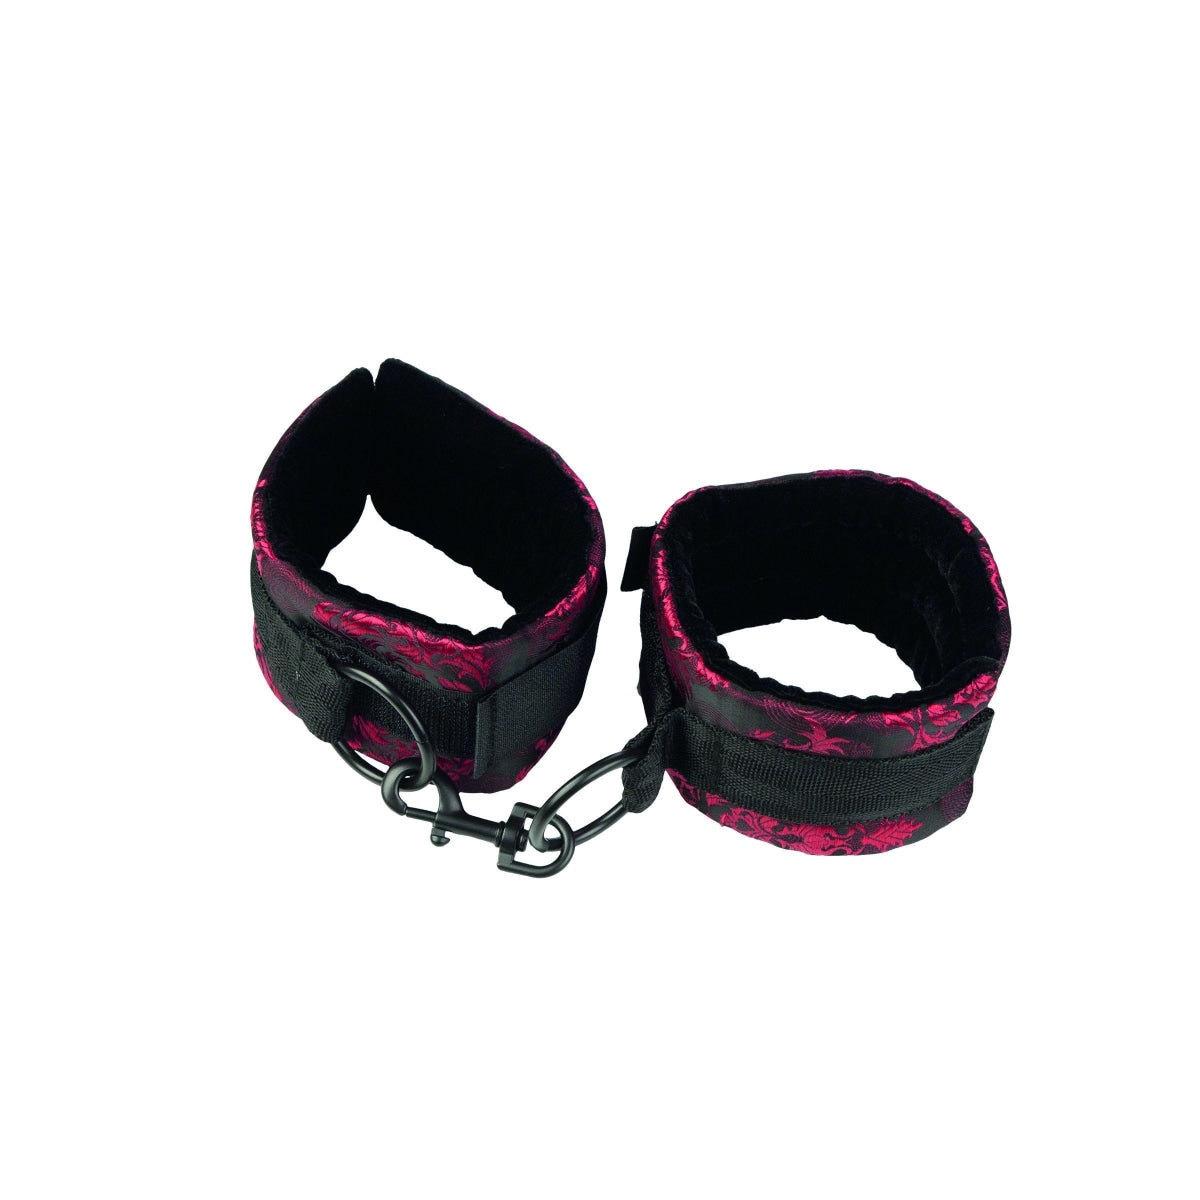 Scandal Universal Cuffs Intimates Adult Boutique